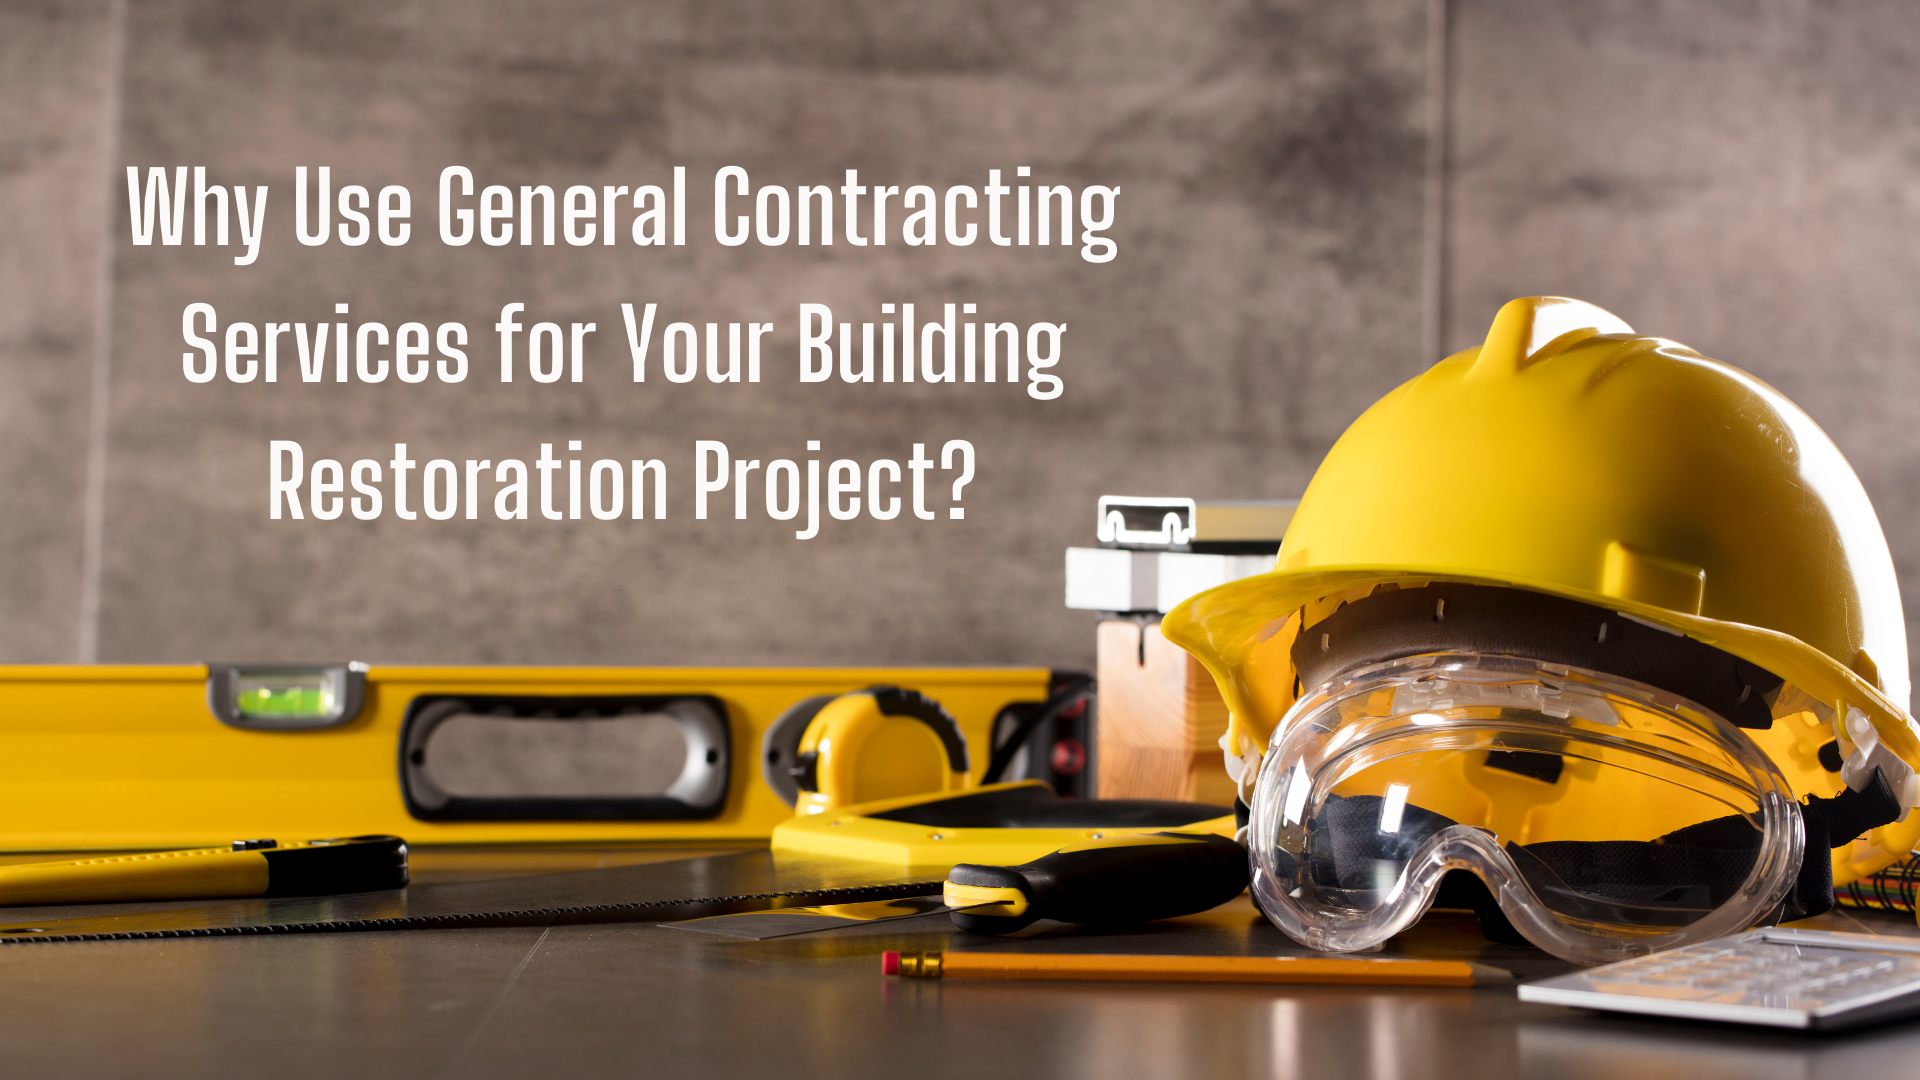 Why Use General Contracting Services for Your Building Restoration Project?